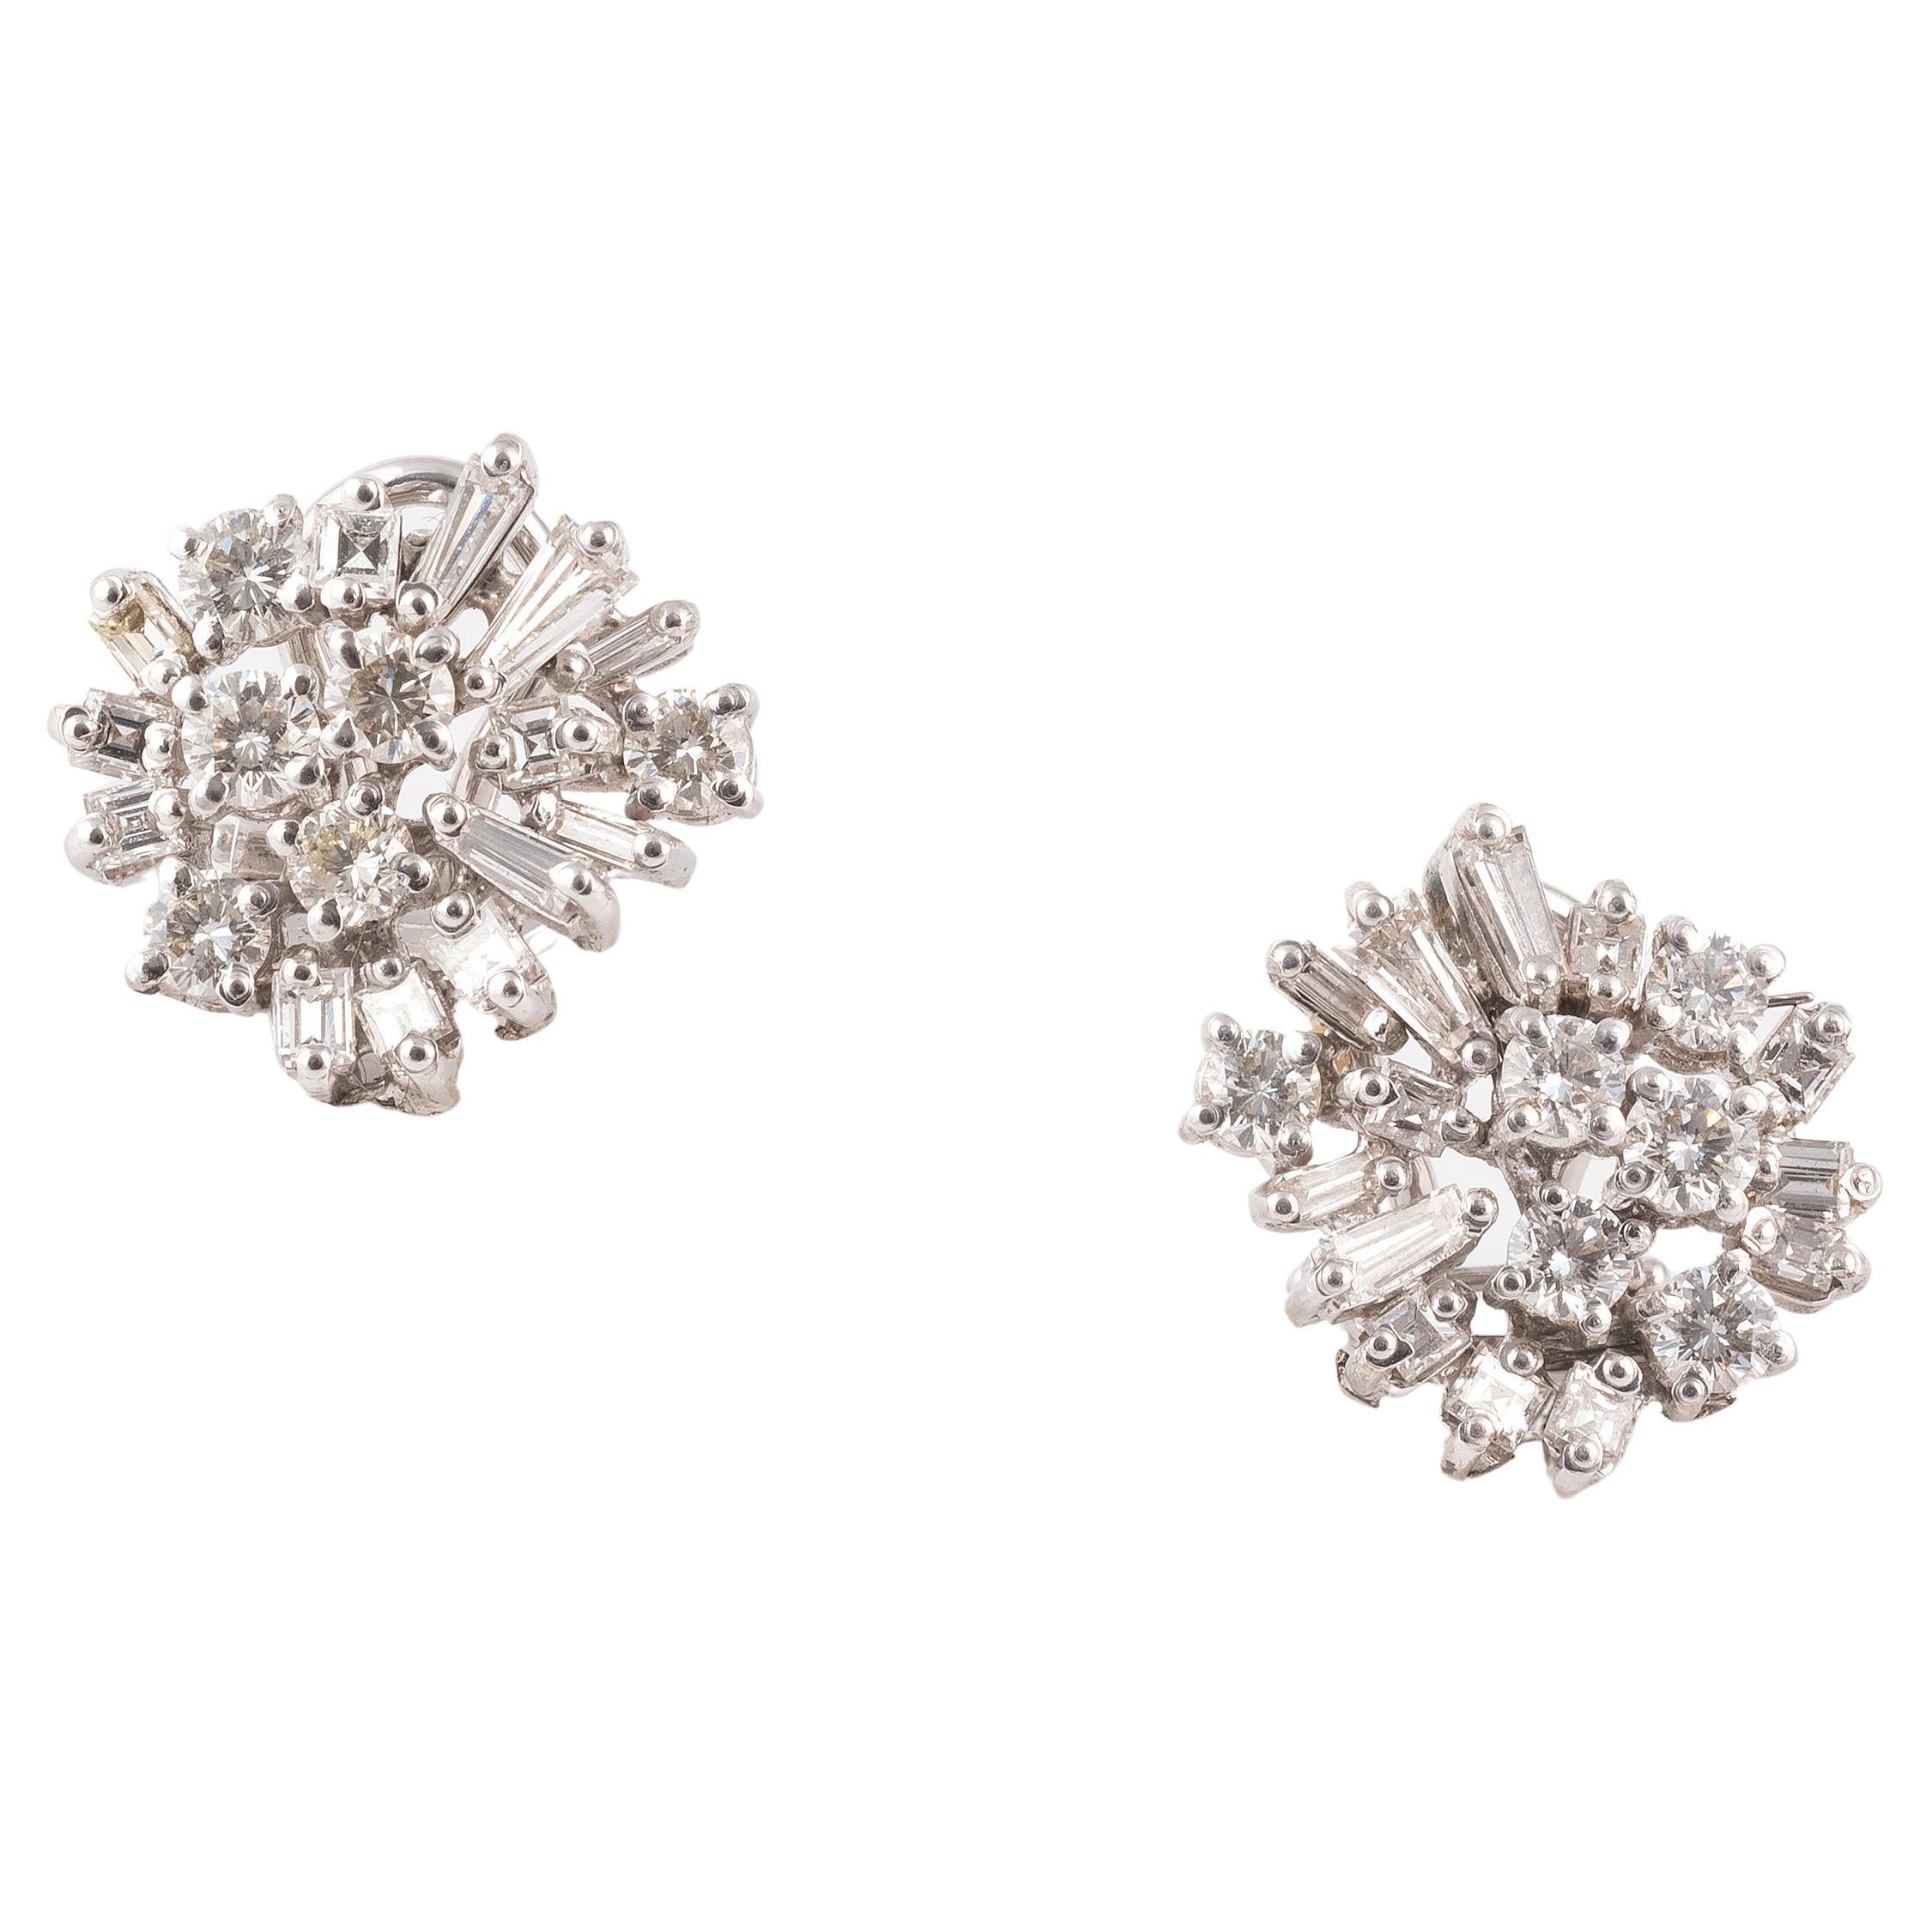 Cluster round and baguette diamond approximately 4,5ct
Diameter 15mm
Weight: 6,7gr.